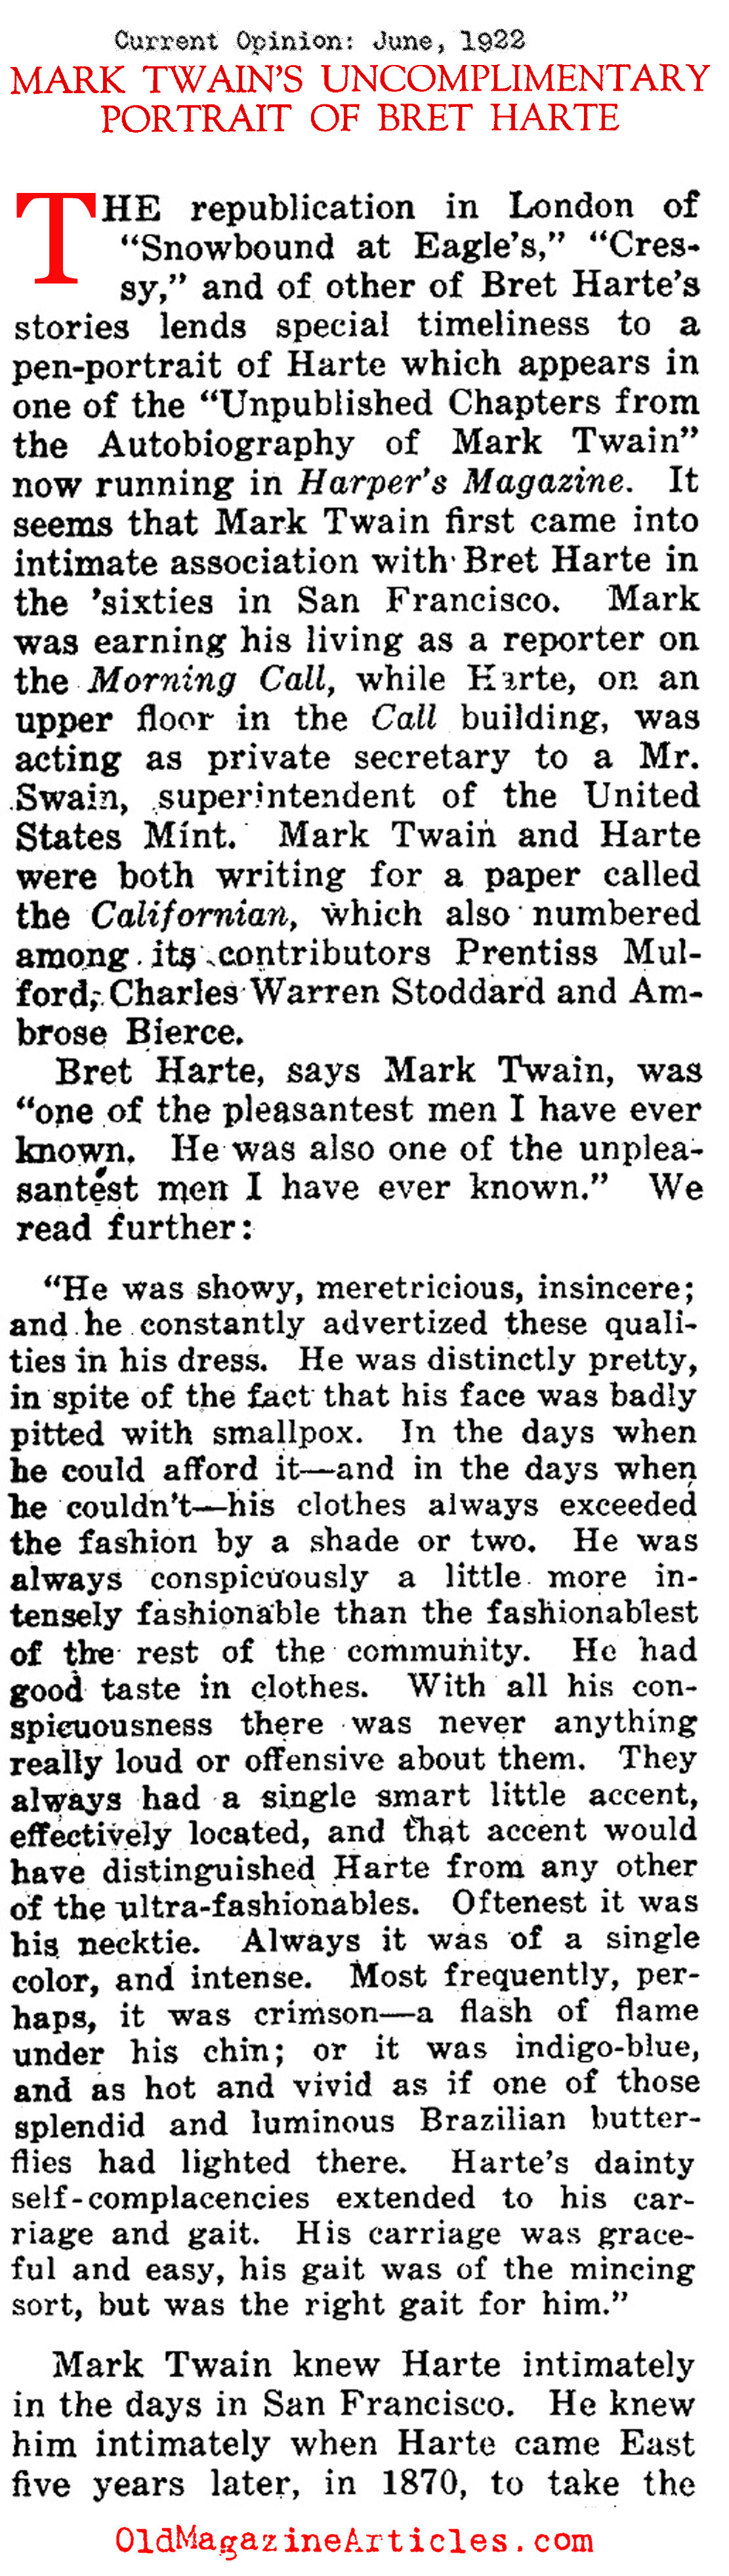 Mark Twain's Unkind Portrait of Bret Harte (Current Opinion, 1922)